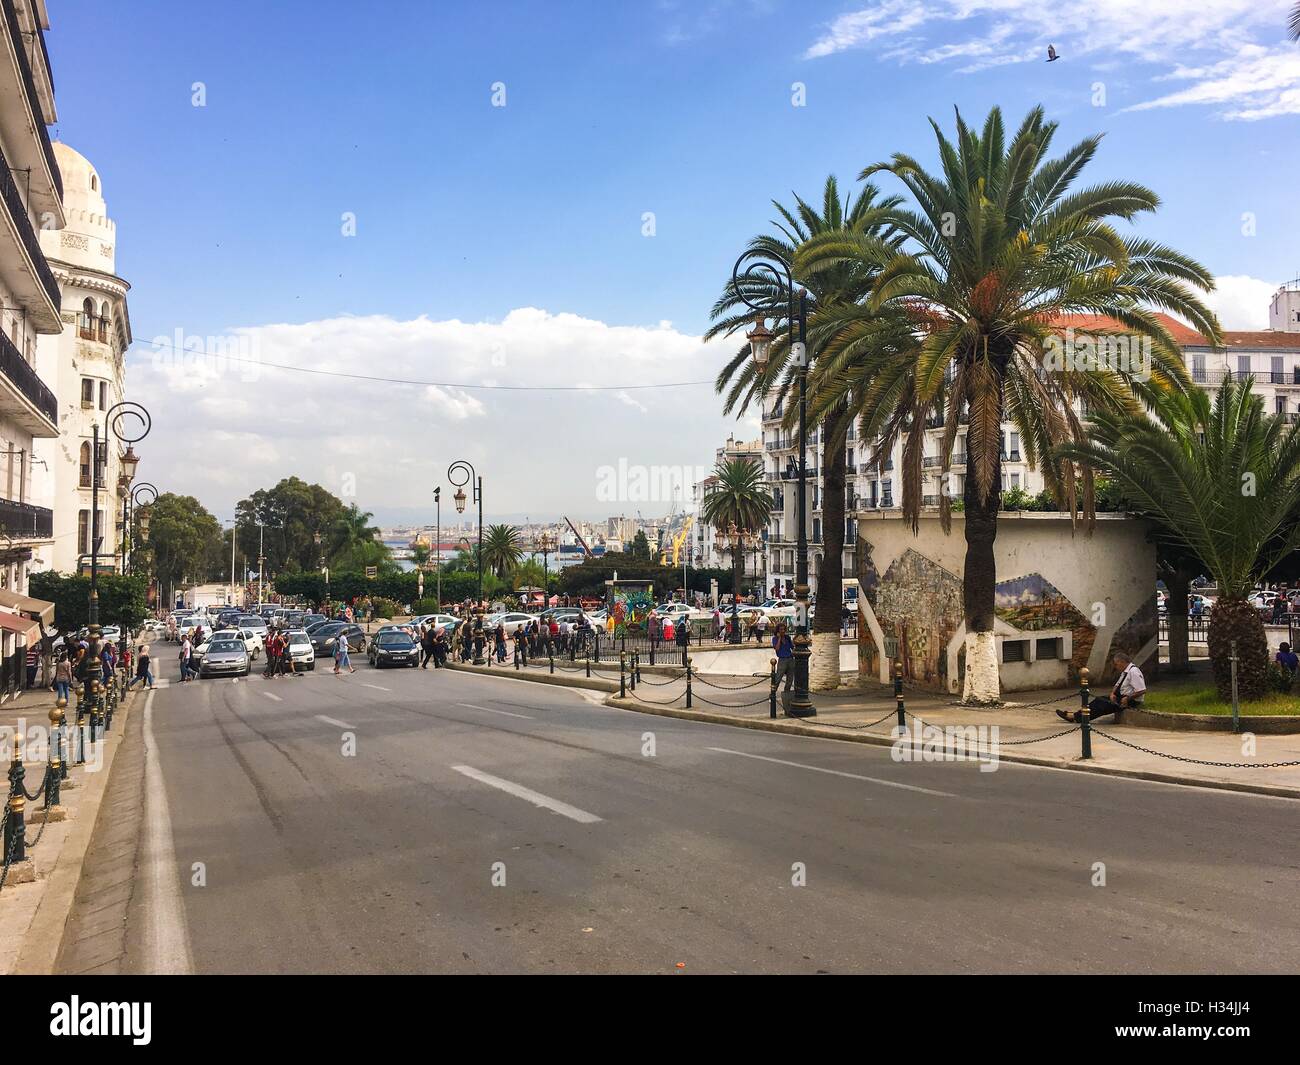 French colonial side of the city of Algiers Algeria.Modern city many old french type buildings. Stock Photo